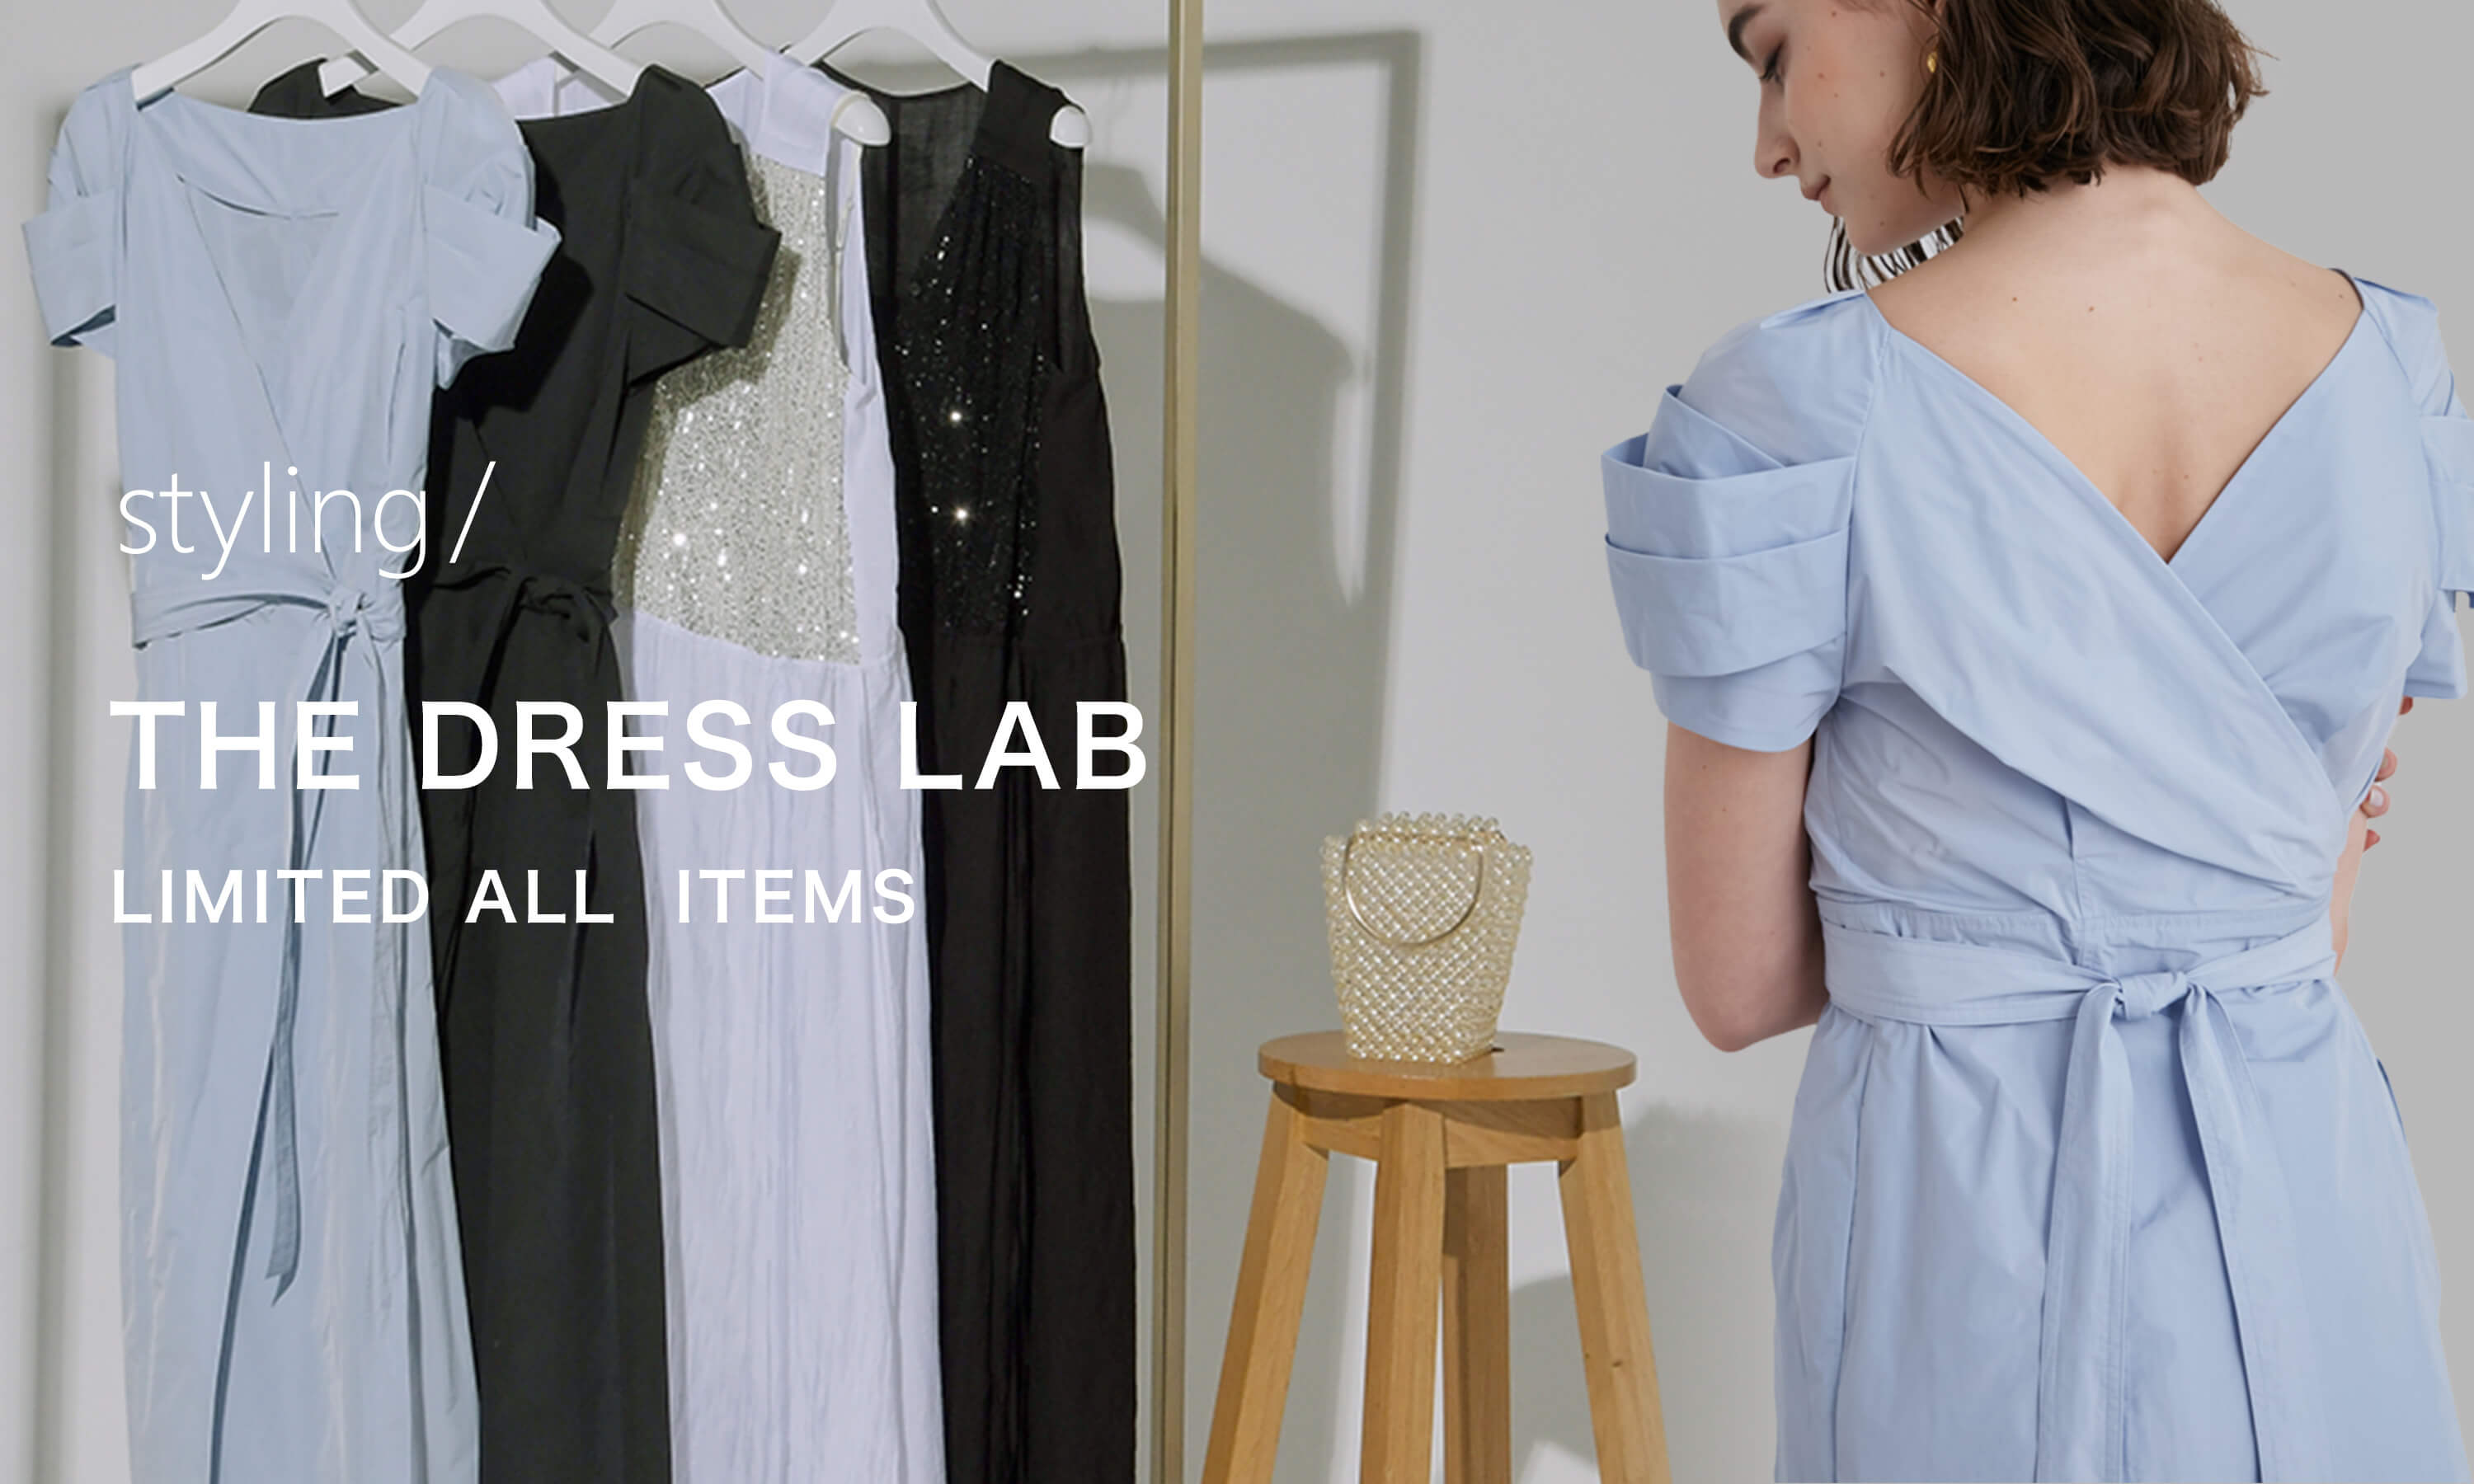 styling THE DRESS LAB LIMITEDALL ITEMS